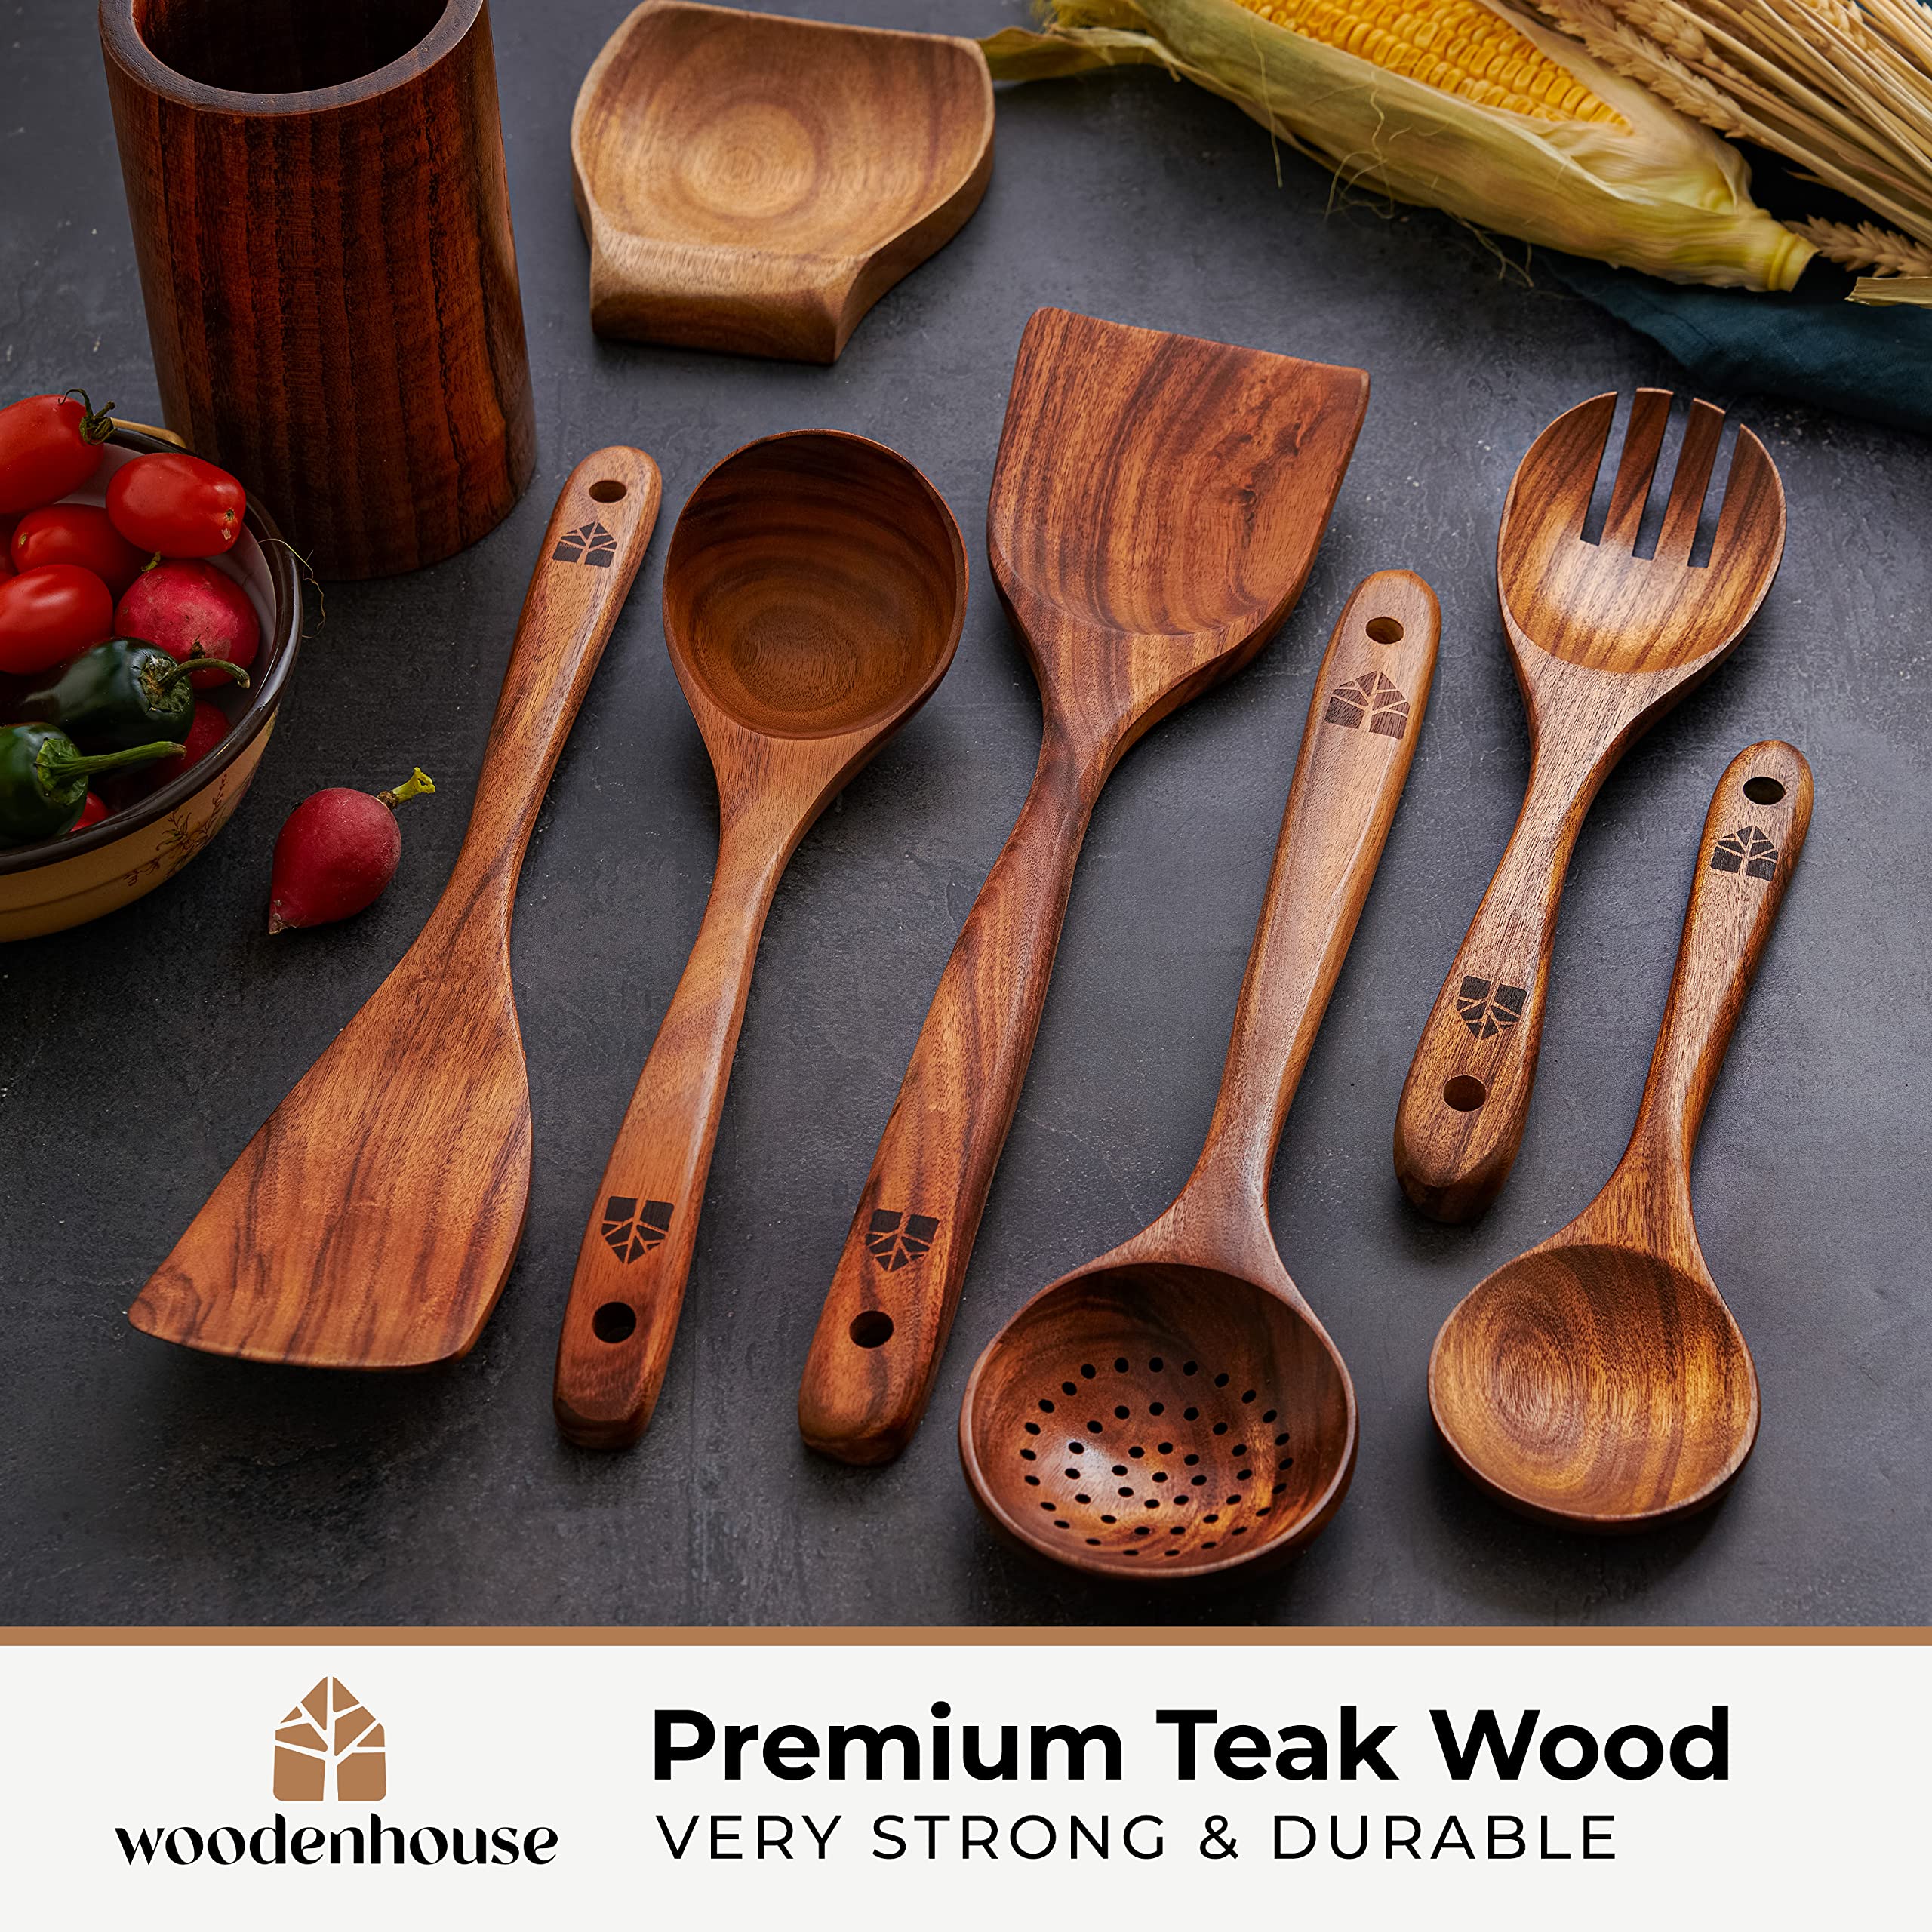 WOODENHOUSE LIFELONG QUALITY Wooden Spatula for cooking, Kitchen Set of 4,  Natural Teak Wooden Utensils including